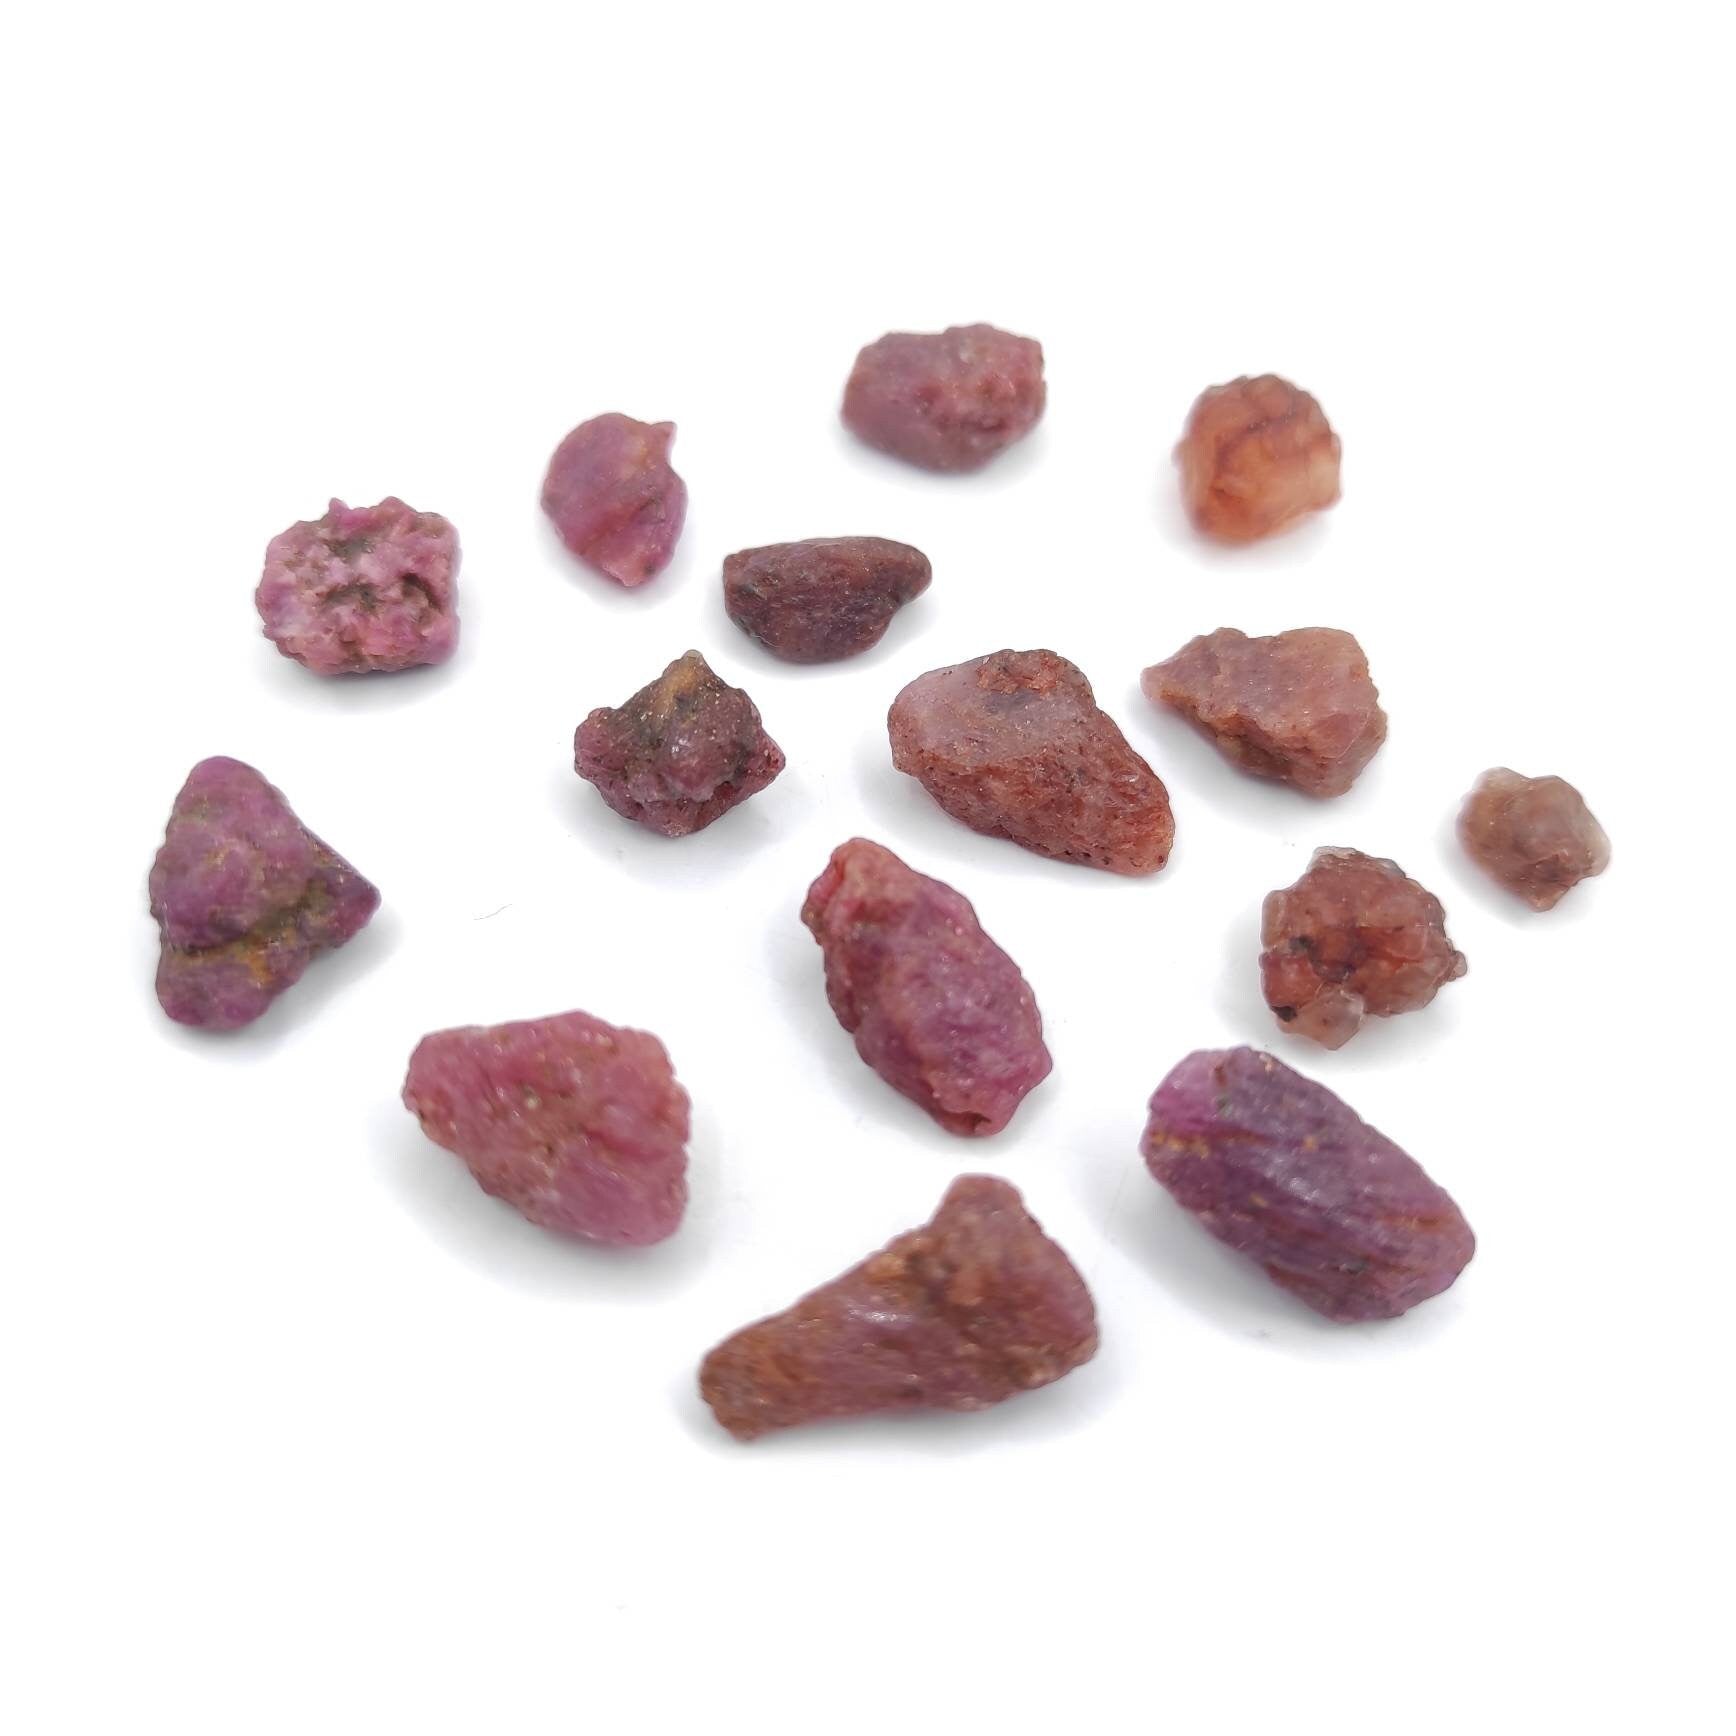 65ct Untreated Ruby Lot - Unheated Ruby Gemstones - Raw Red Ruby from Mozambique - Rough Rubies Gems - Loose Ruby Gemstones - Rough Gems